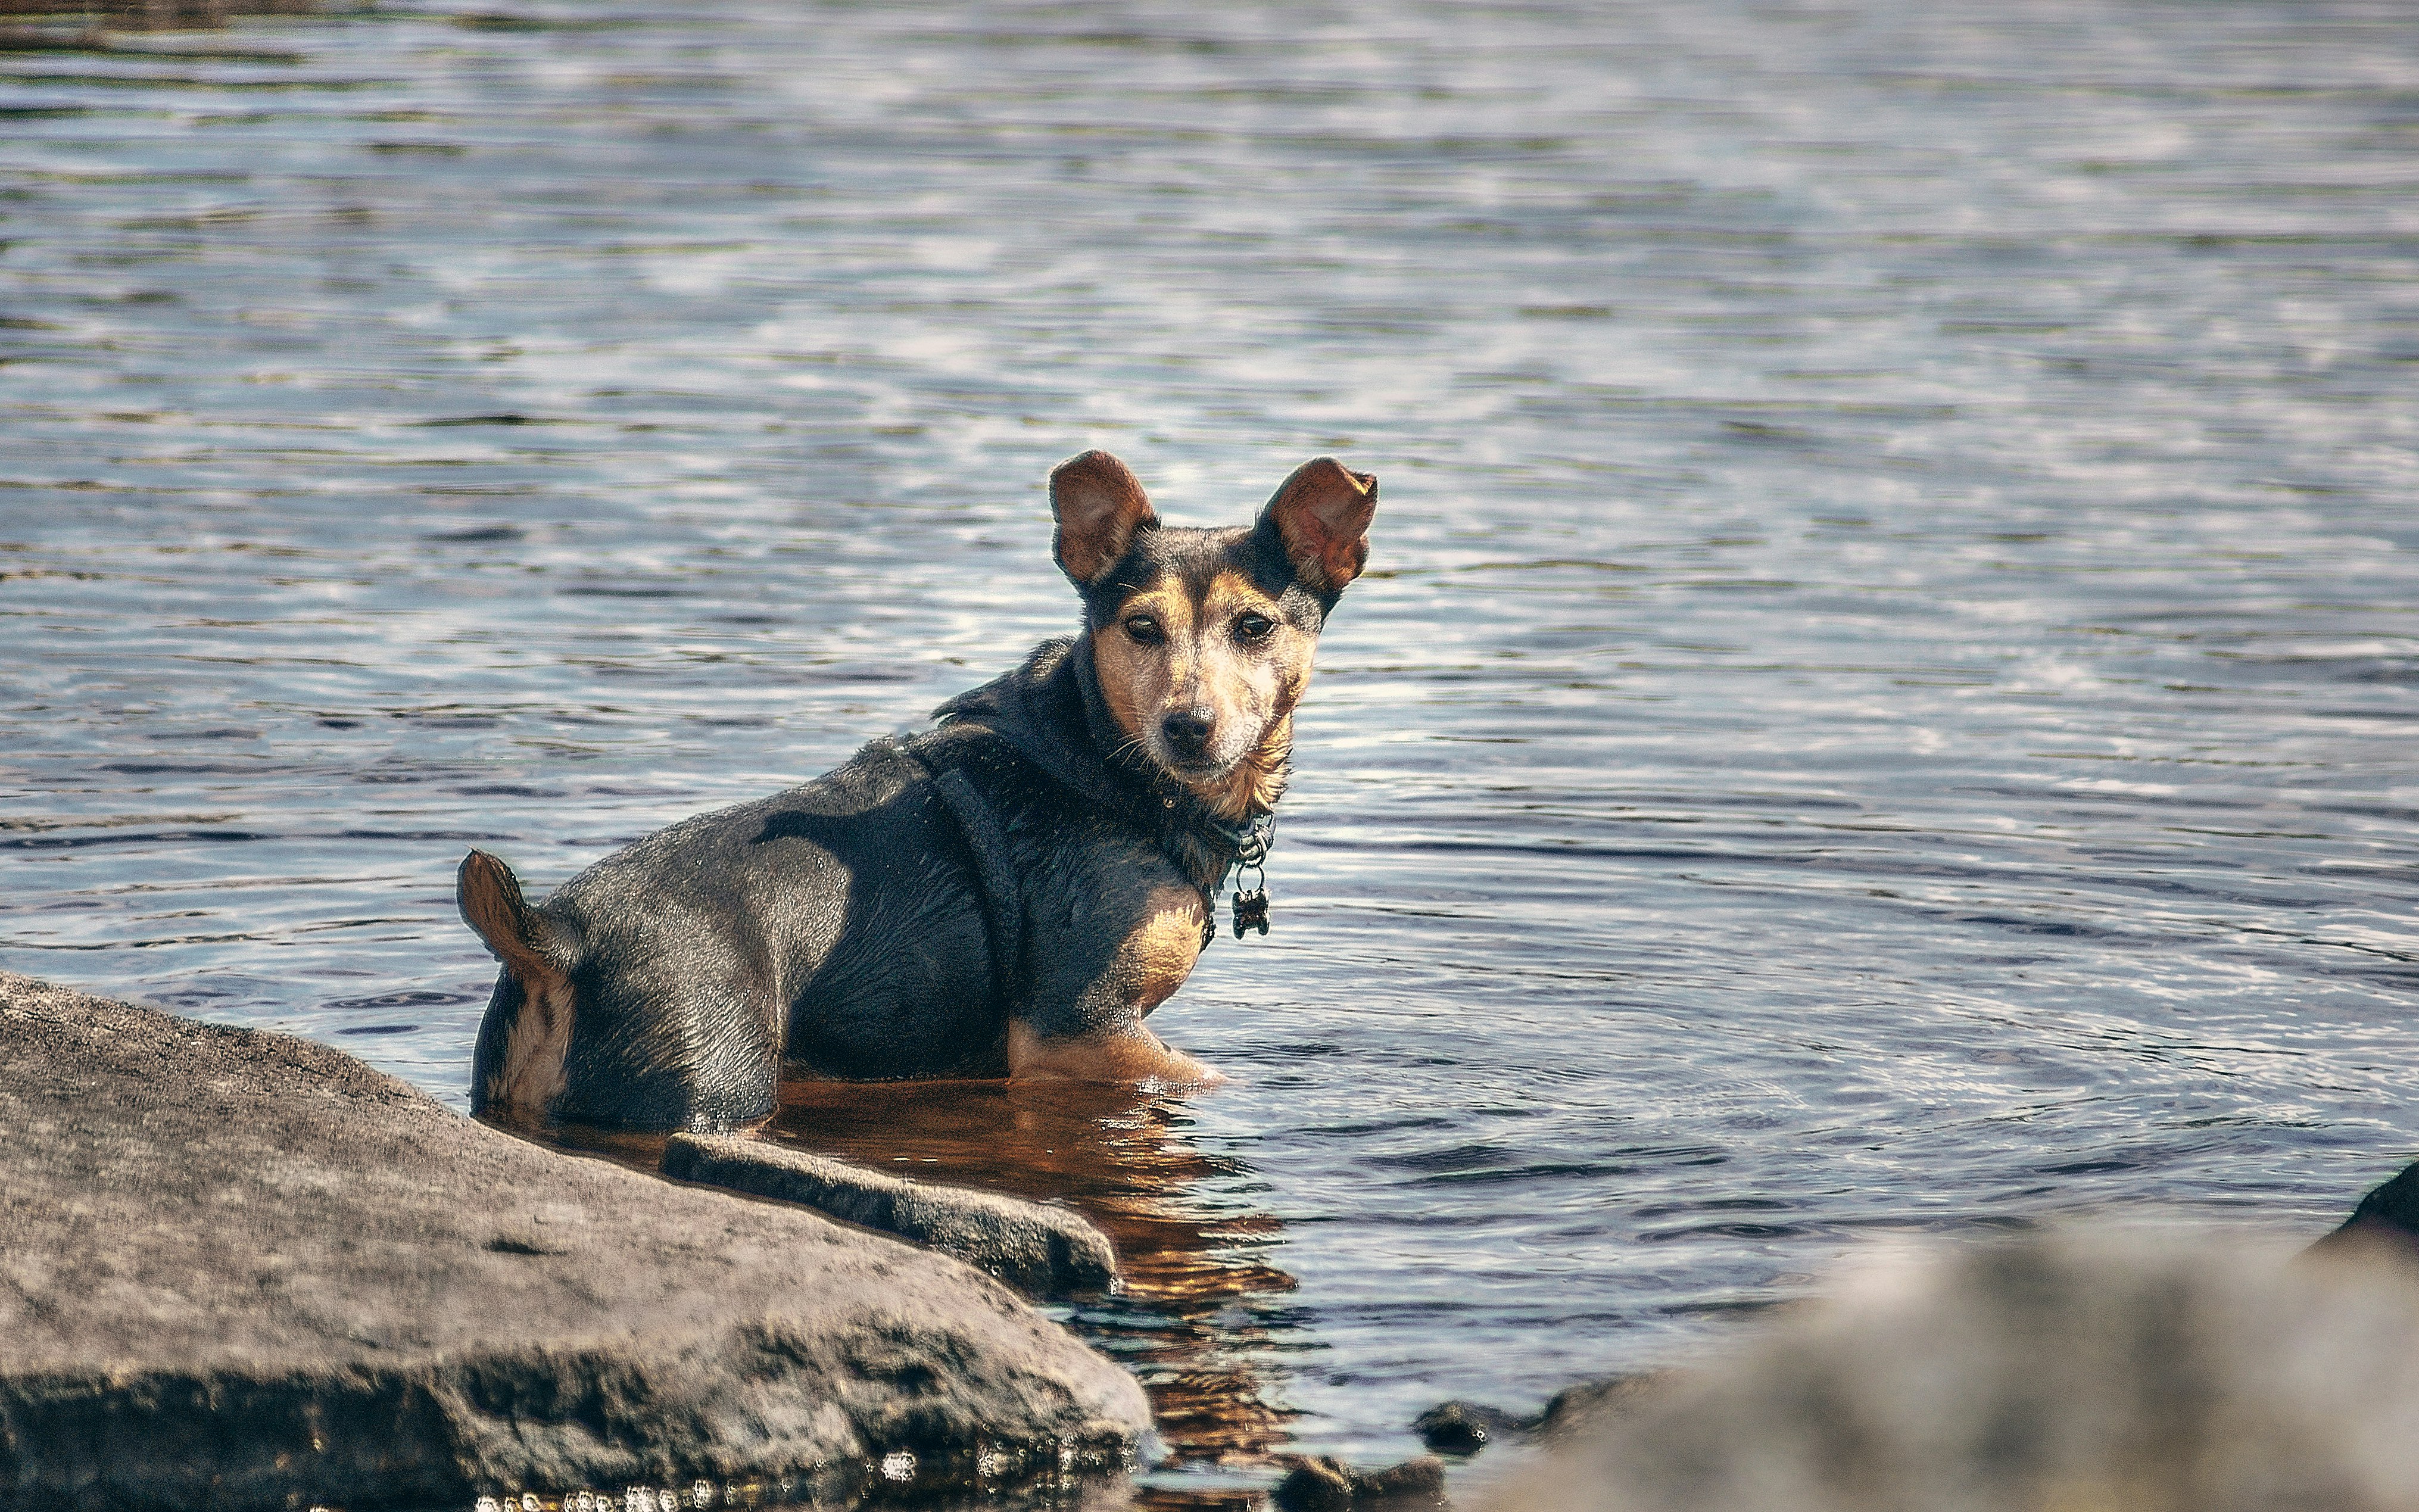 brown and black short coated small dog on gray rock near body of water during daytime